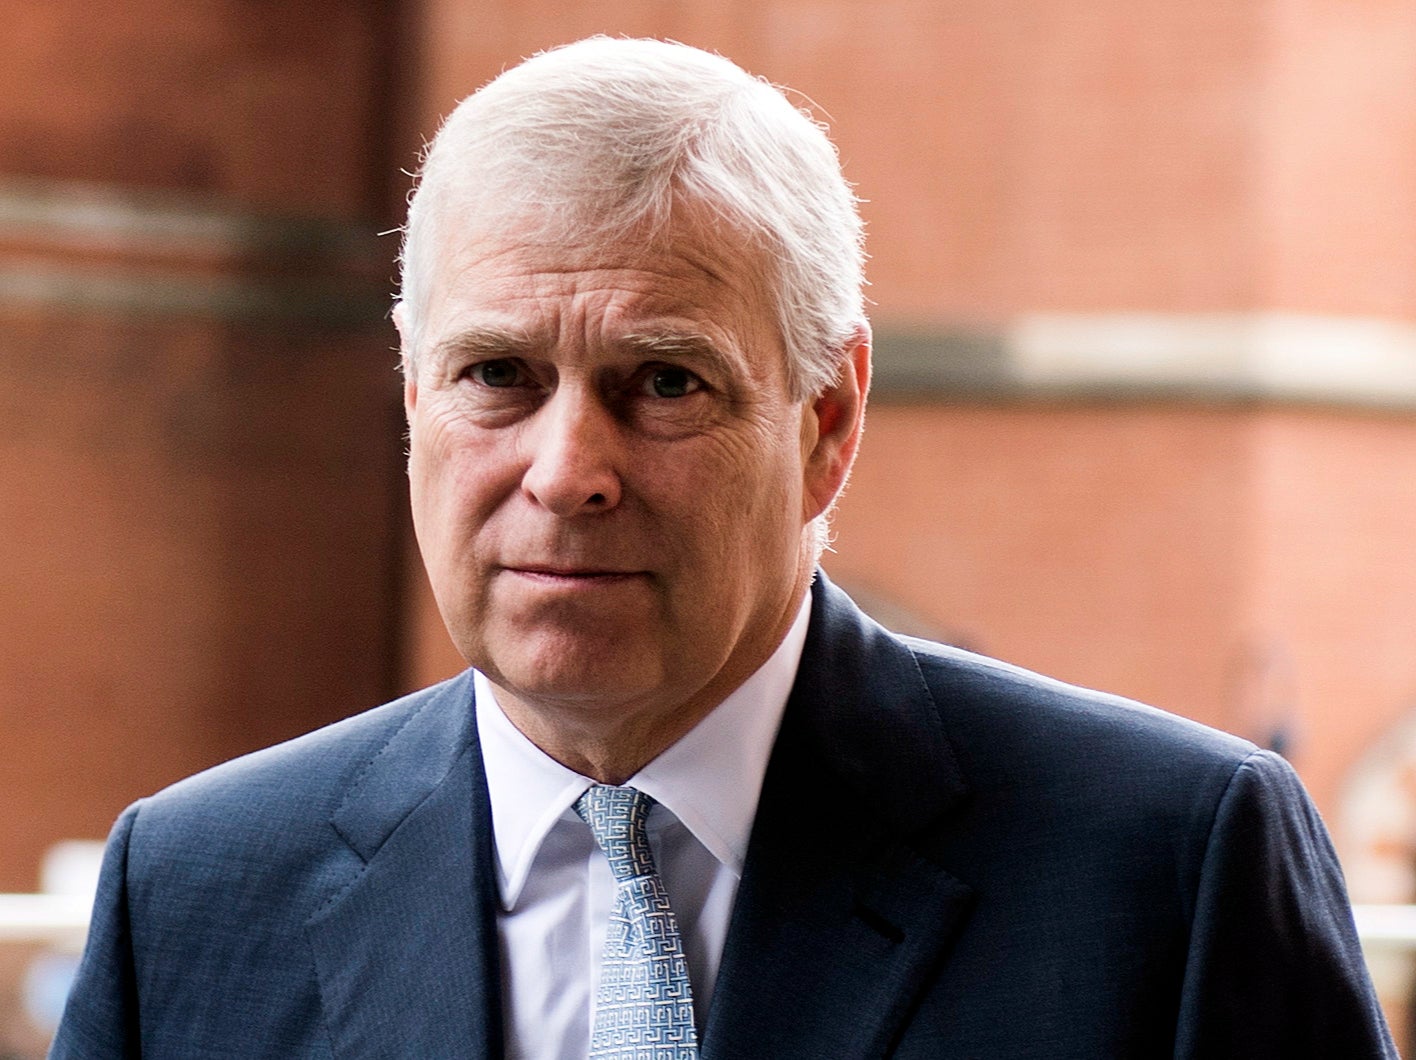 Prince Andrew settlement: Five unanswered questions including who